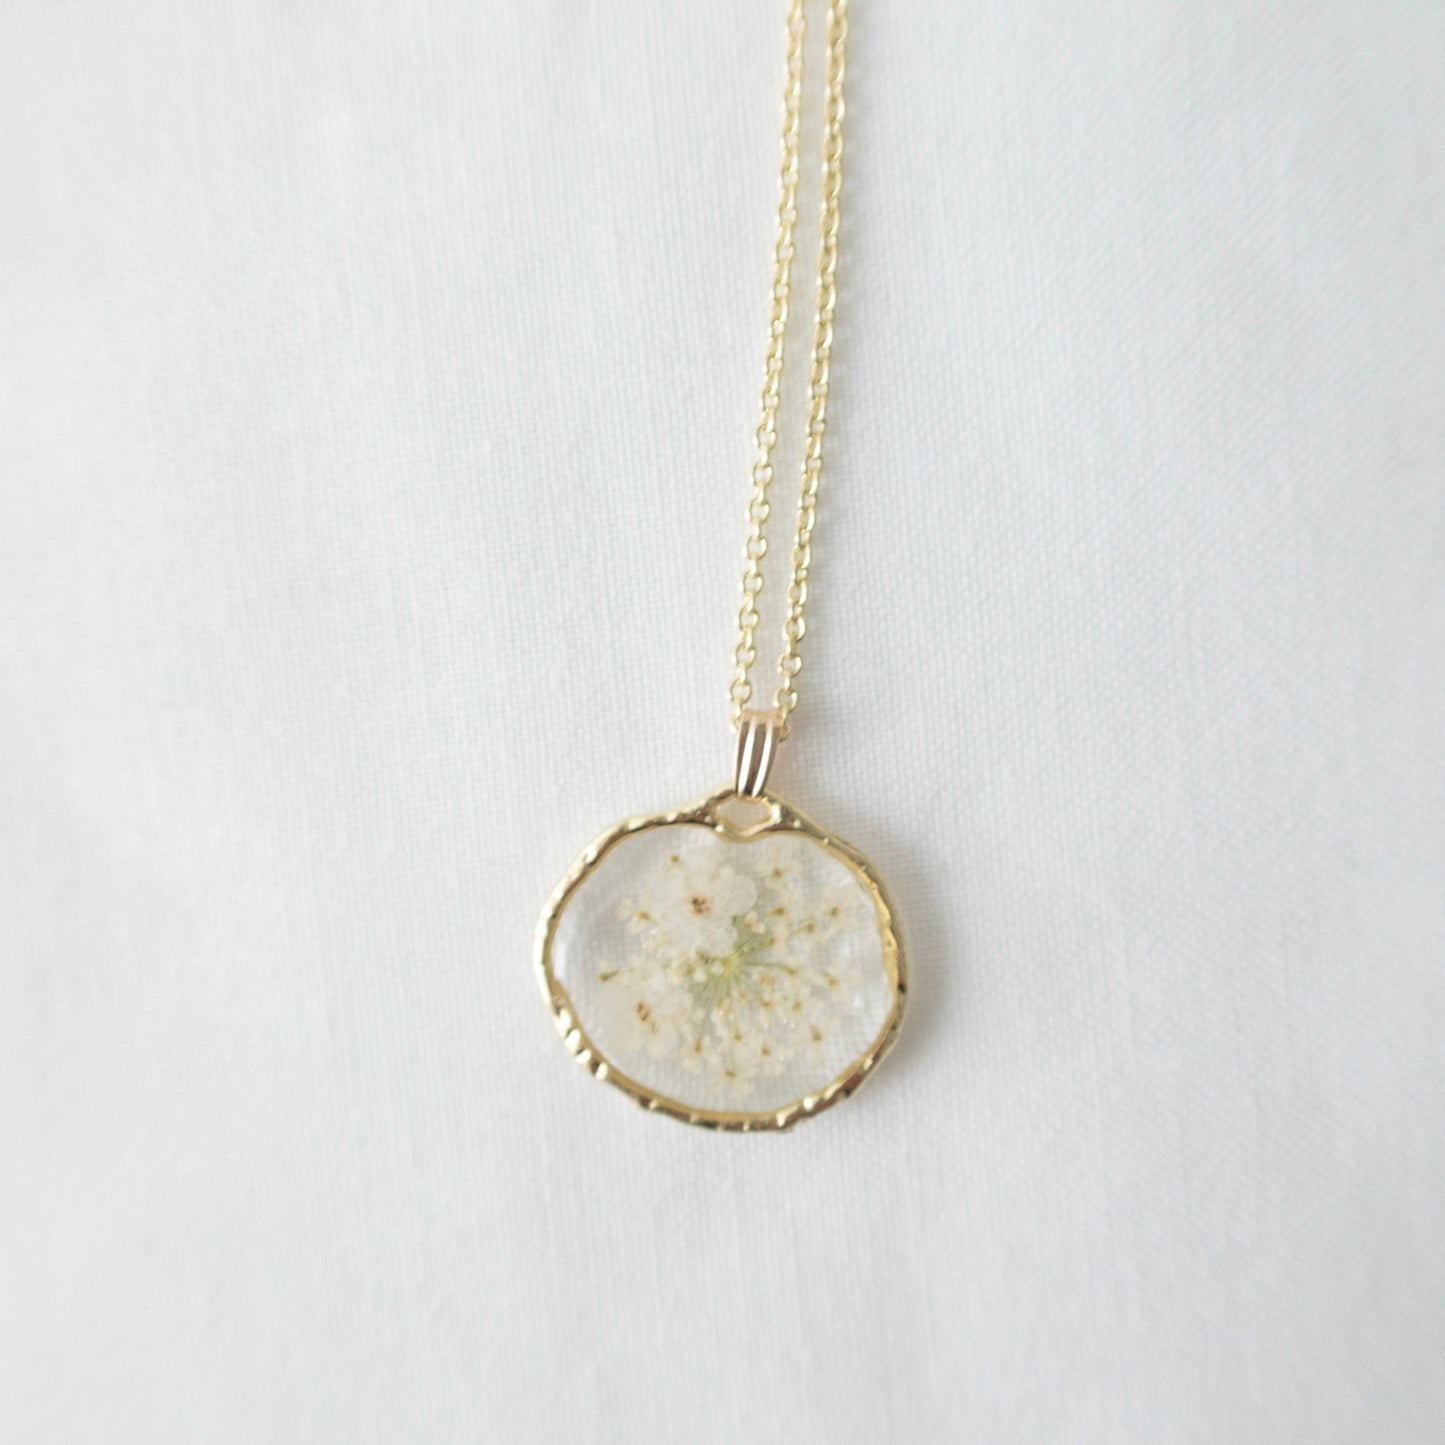 The Trouvaille White Forget Me Not Necklace